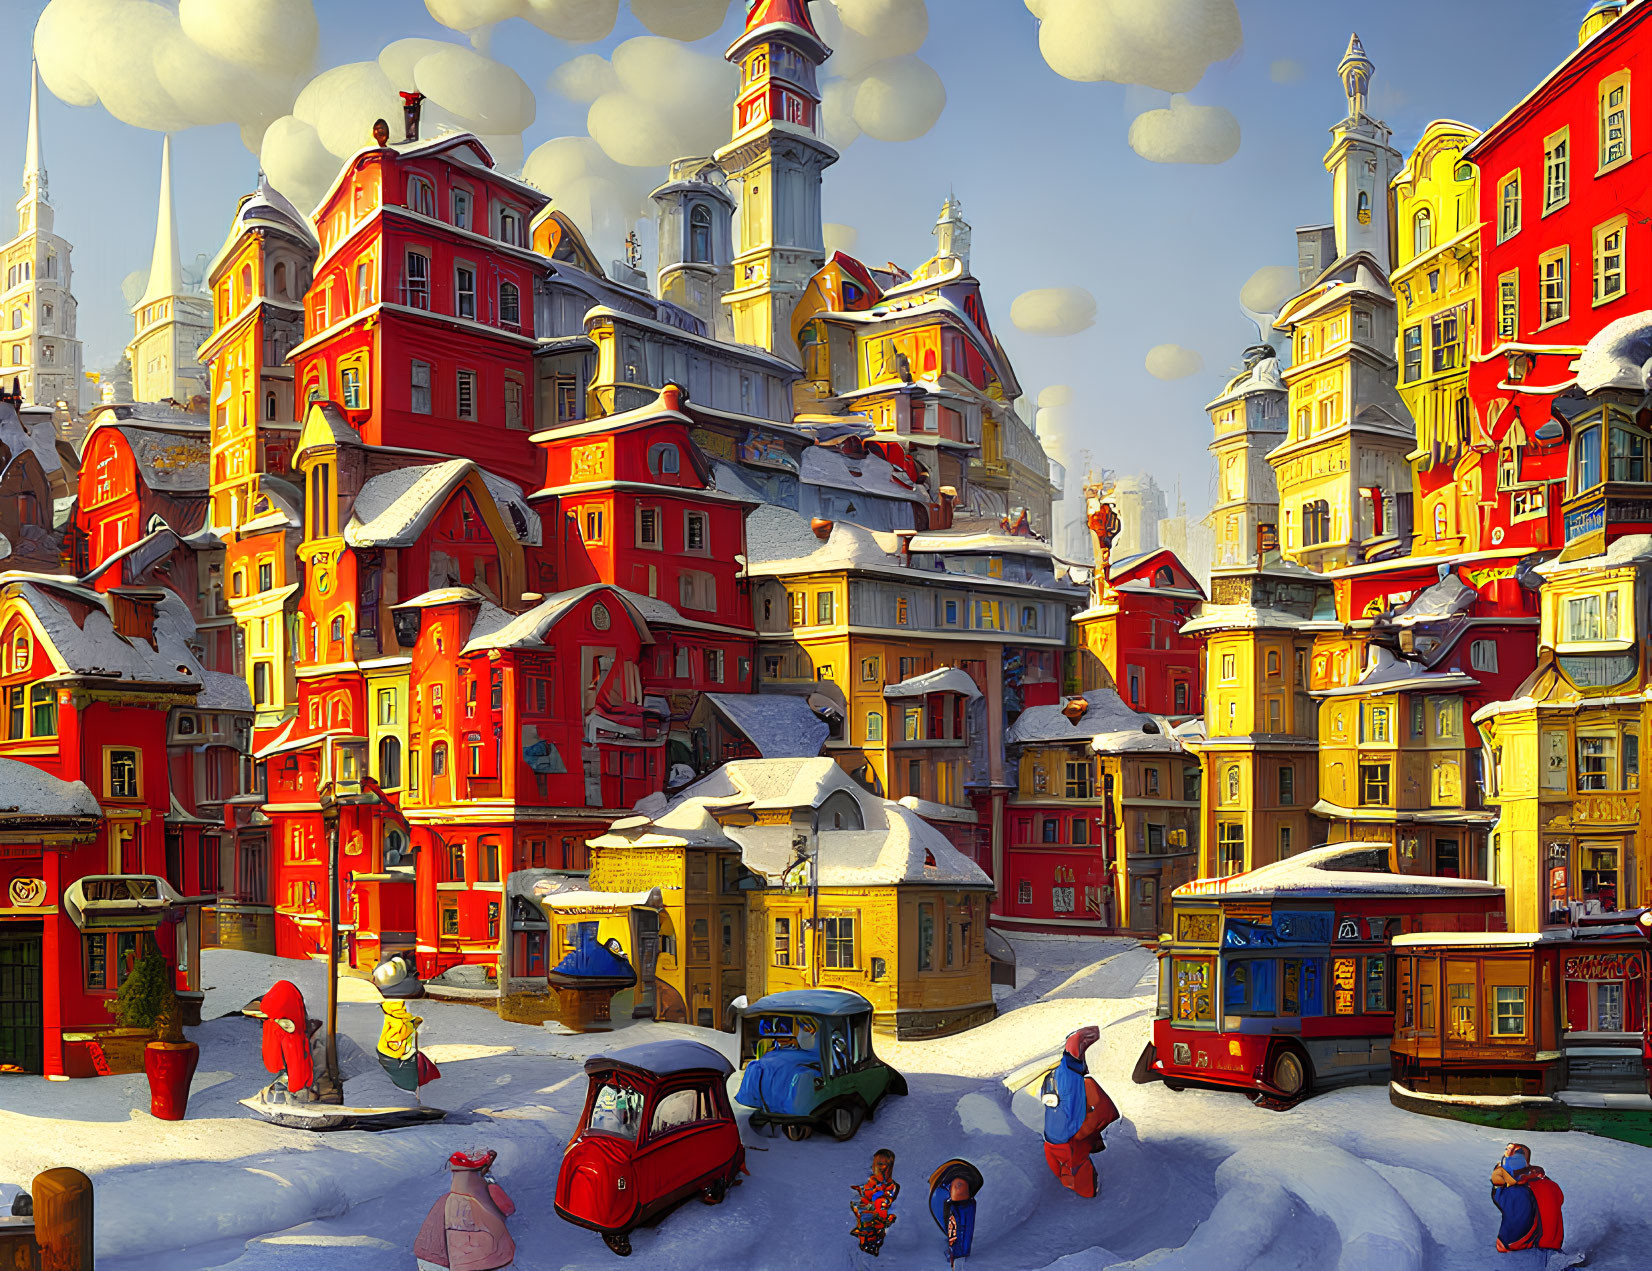 Colorful Winter Town Scene with People, Cars, and Tram